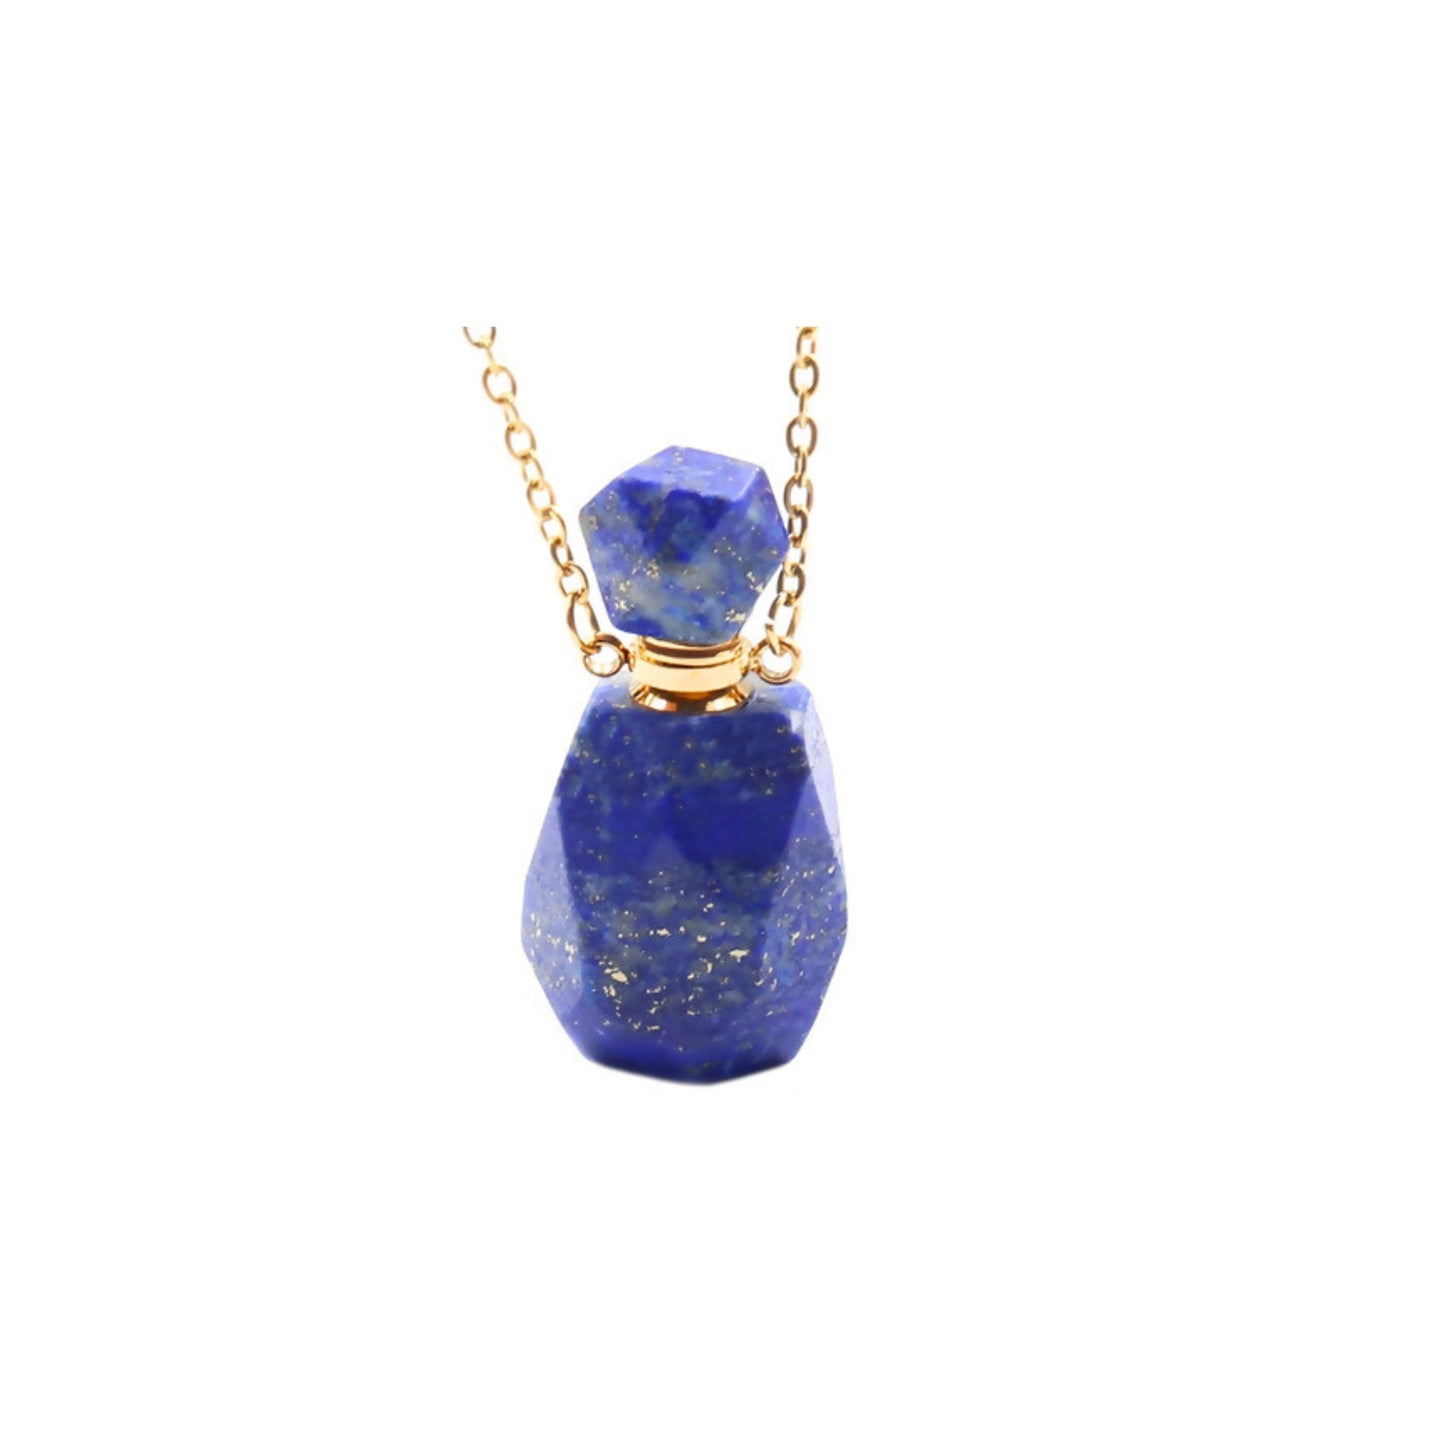 SERENIDAD Lapis Lazuli and Stainless Steel Necklace